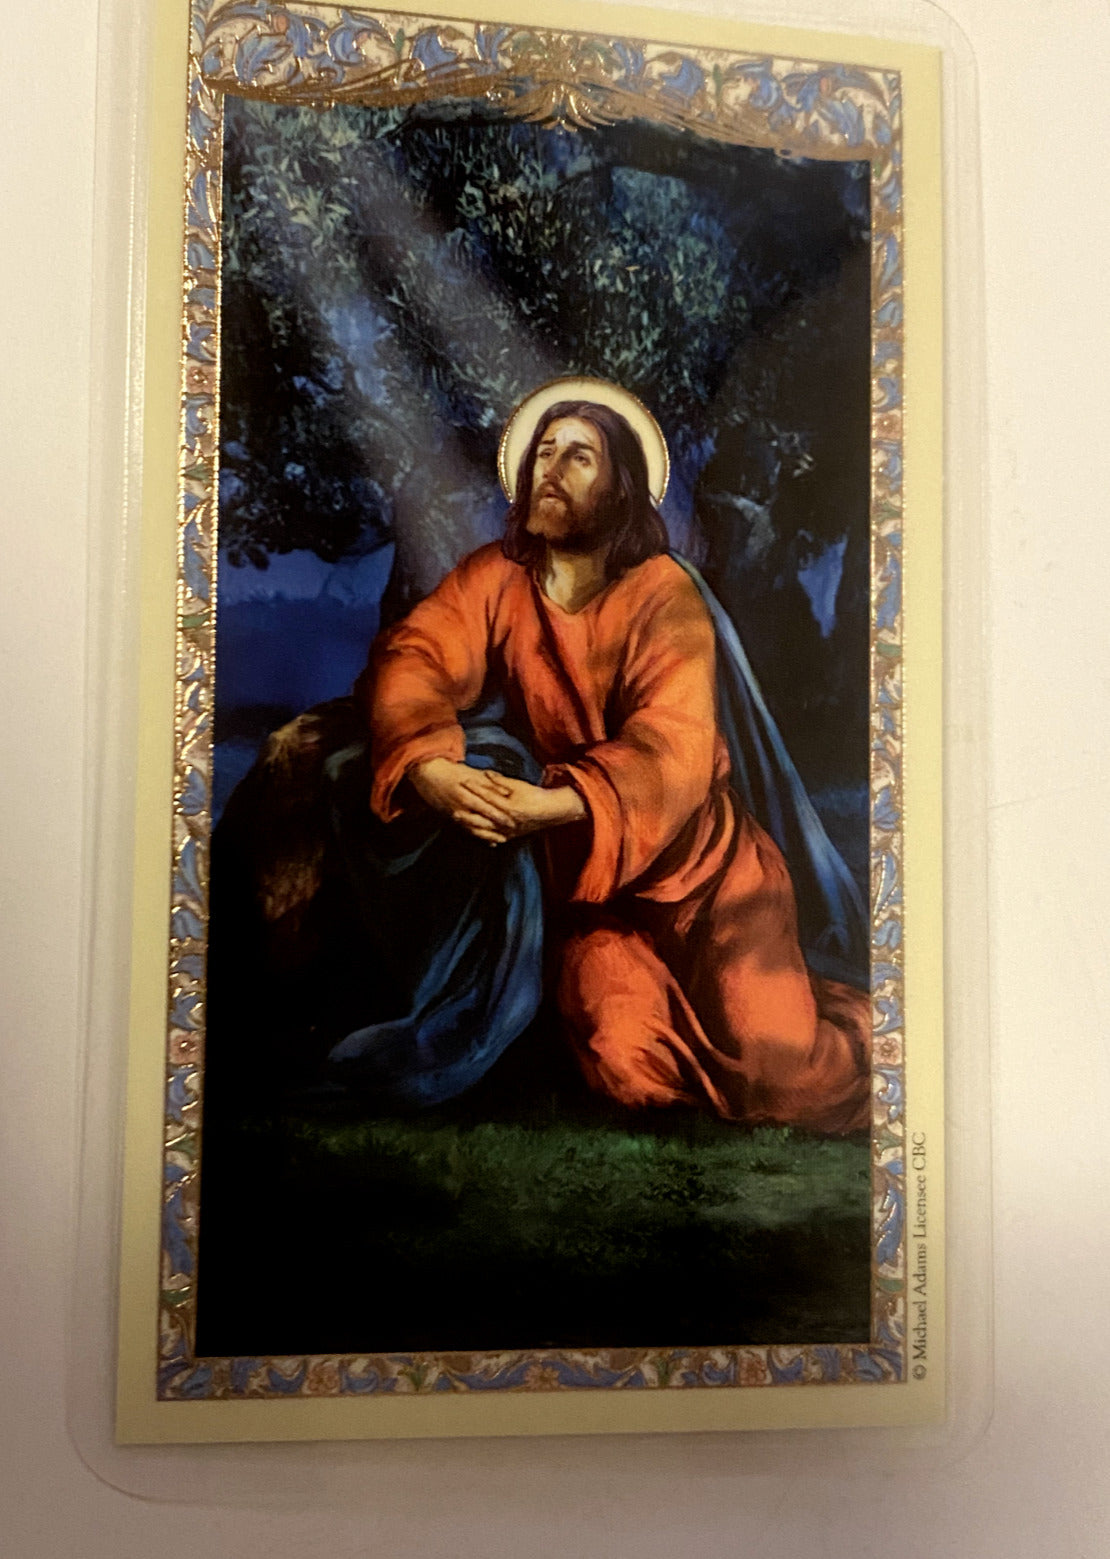 Jesus Christ/"The Power of Prayer " Laminated Prayer Card, New - Bob and Penny Lord